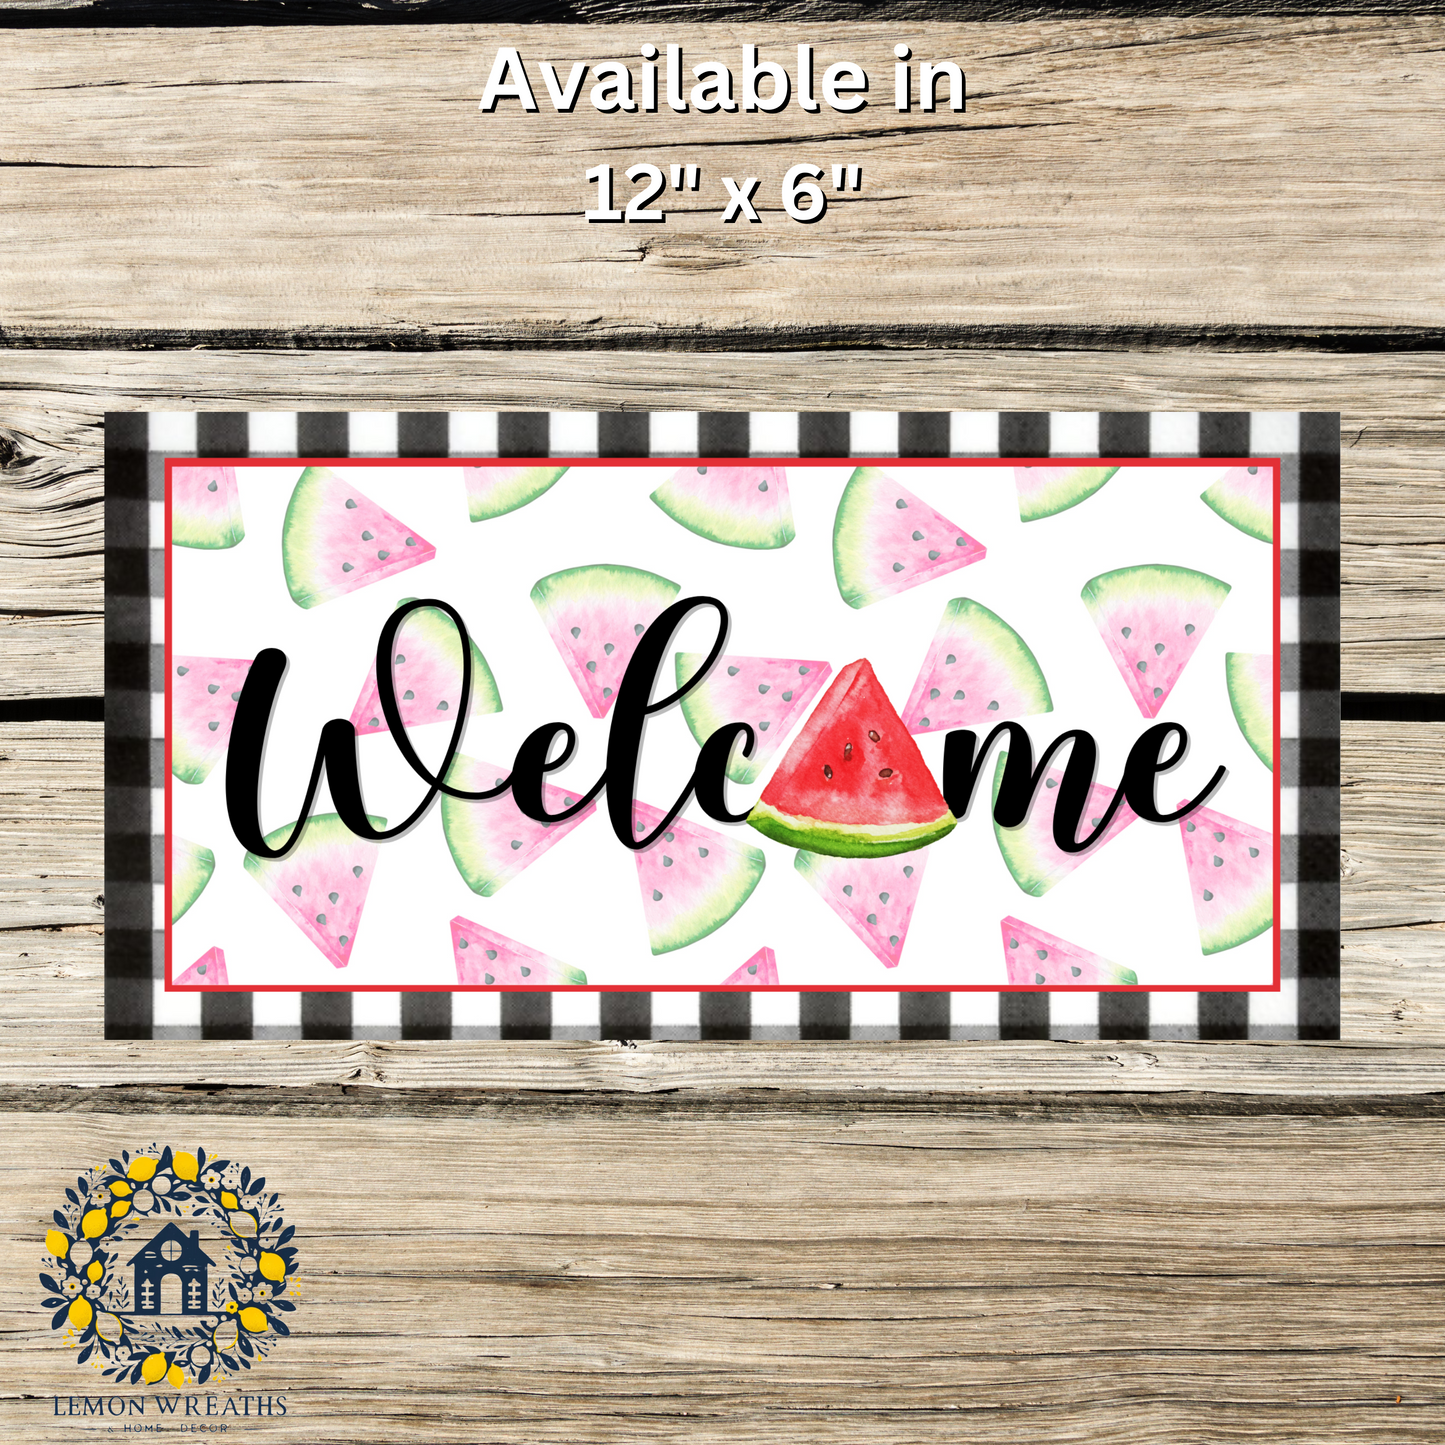 Welcome Watermelon Metal Sign